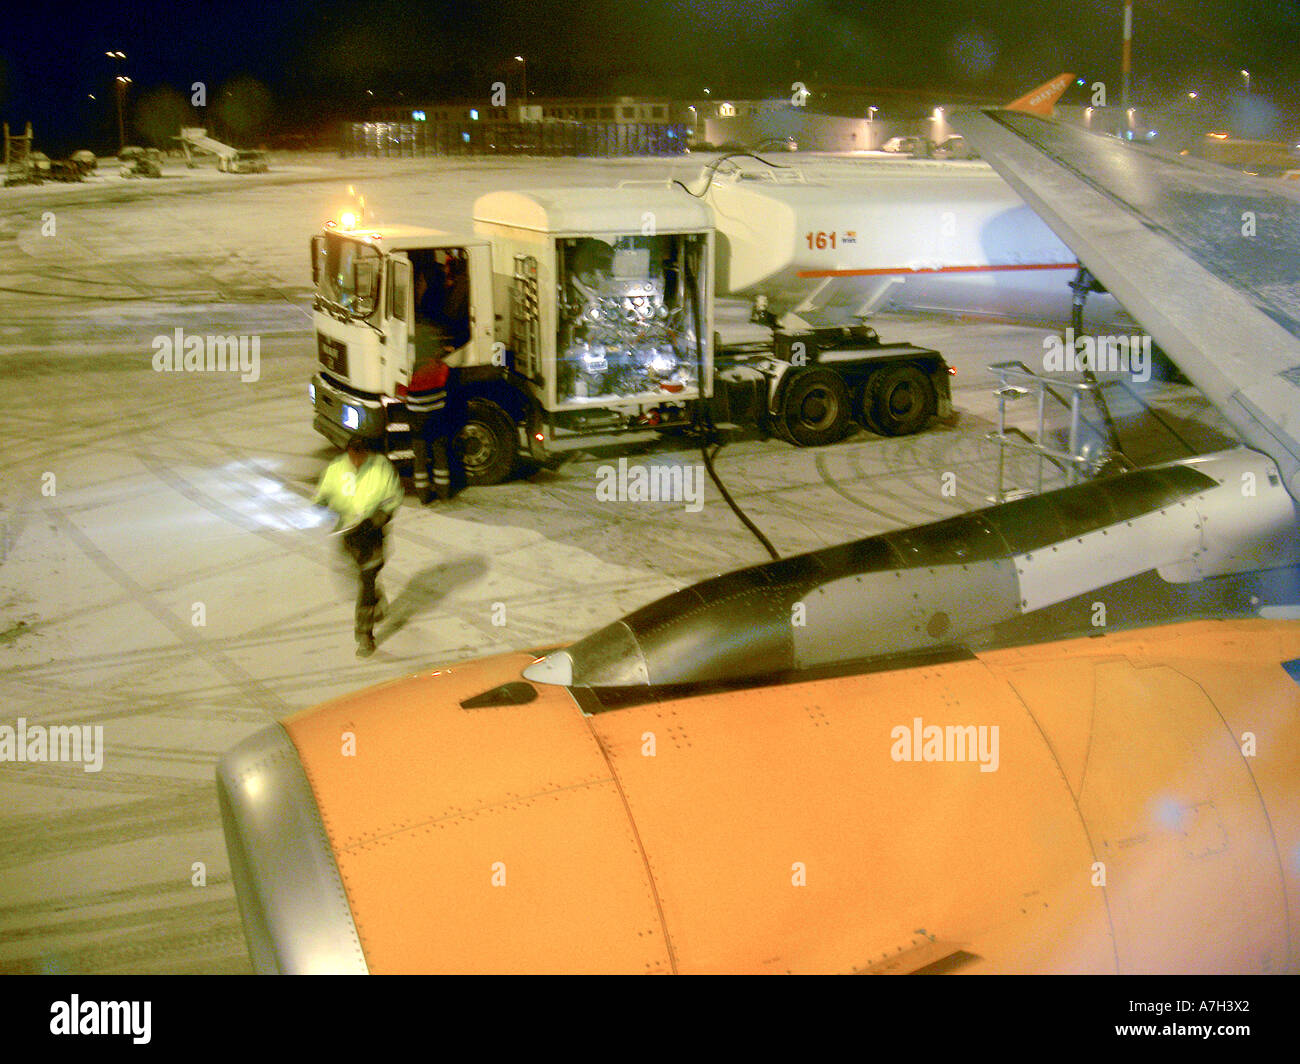 De-icing de icing melting ice from wing of passenger jet airline plane aircraft on airport apron in winter prior to take off Stock Photo